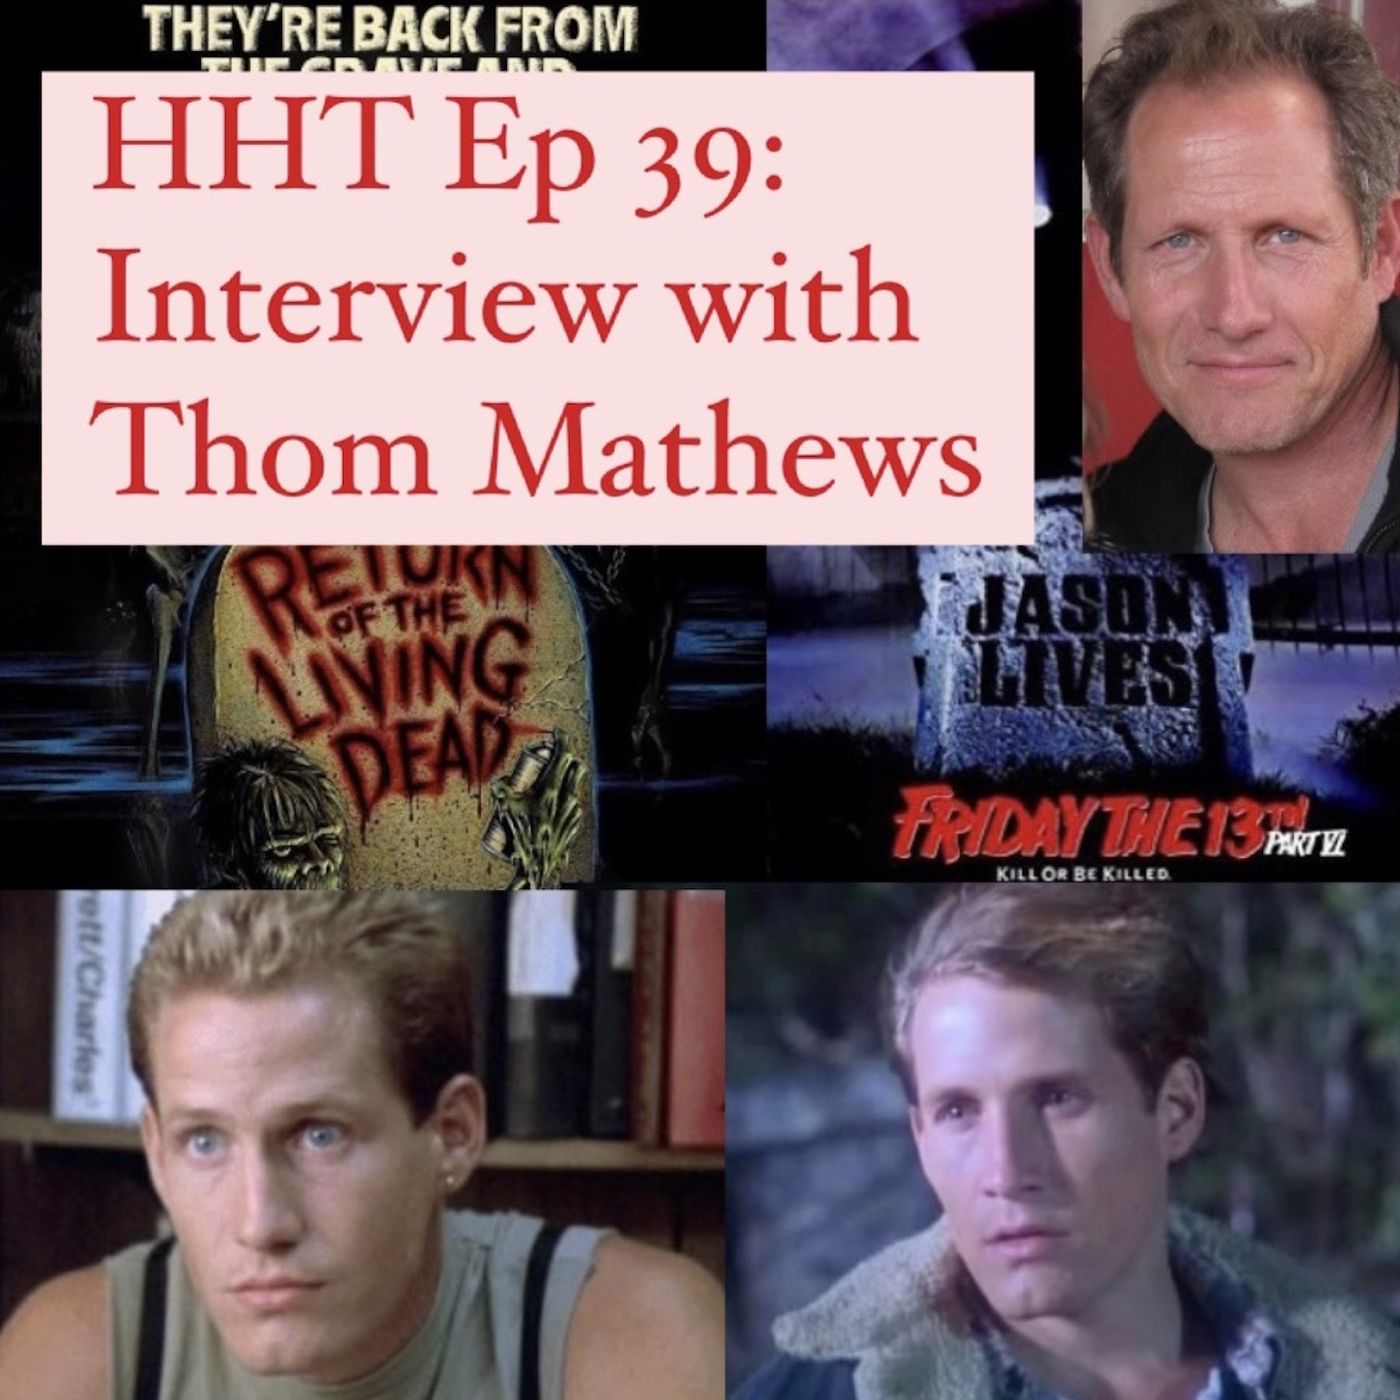 Ep 39: Interview w/Thom Mathews from “F13 Pt 6” & “The Return of the Living Dead” Image